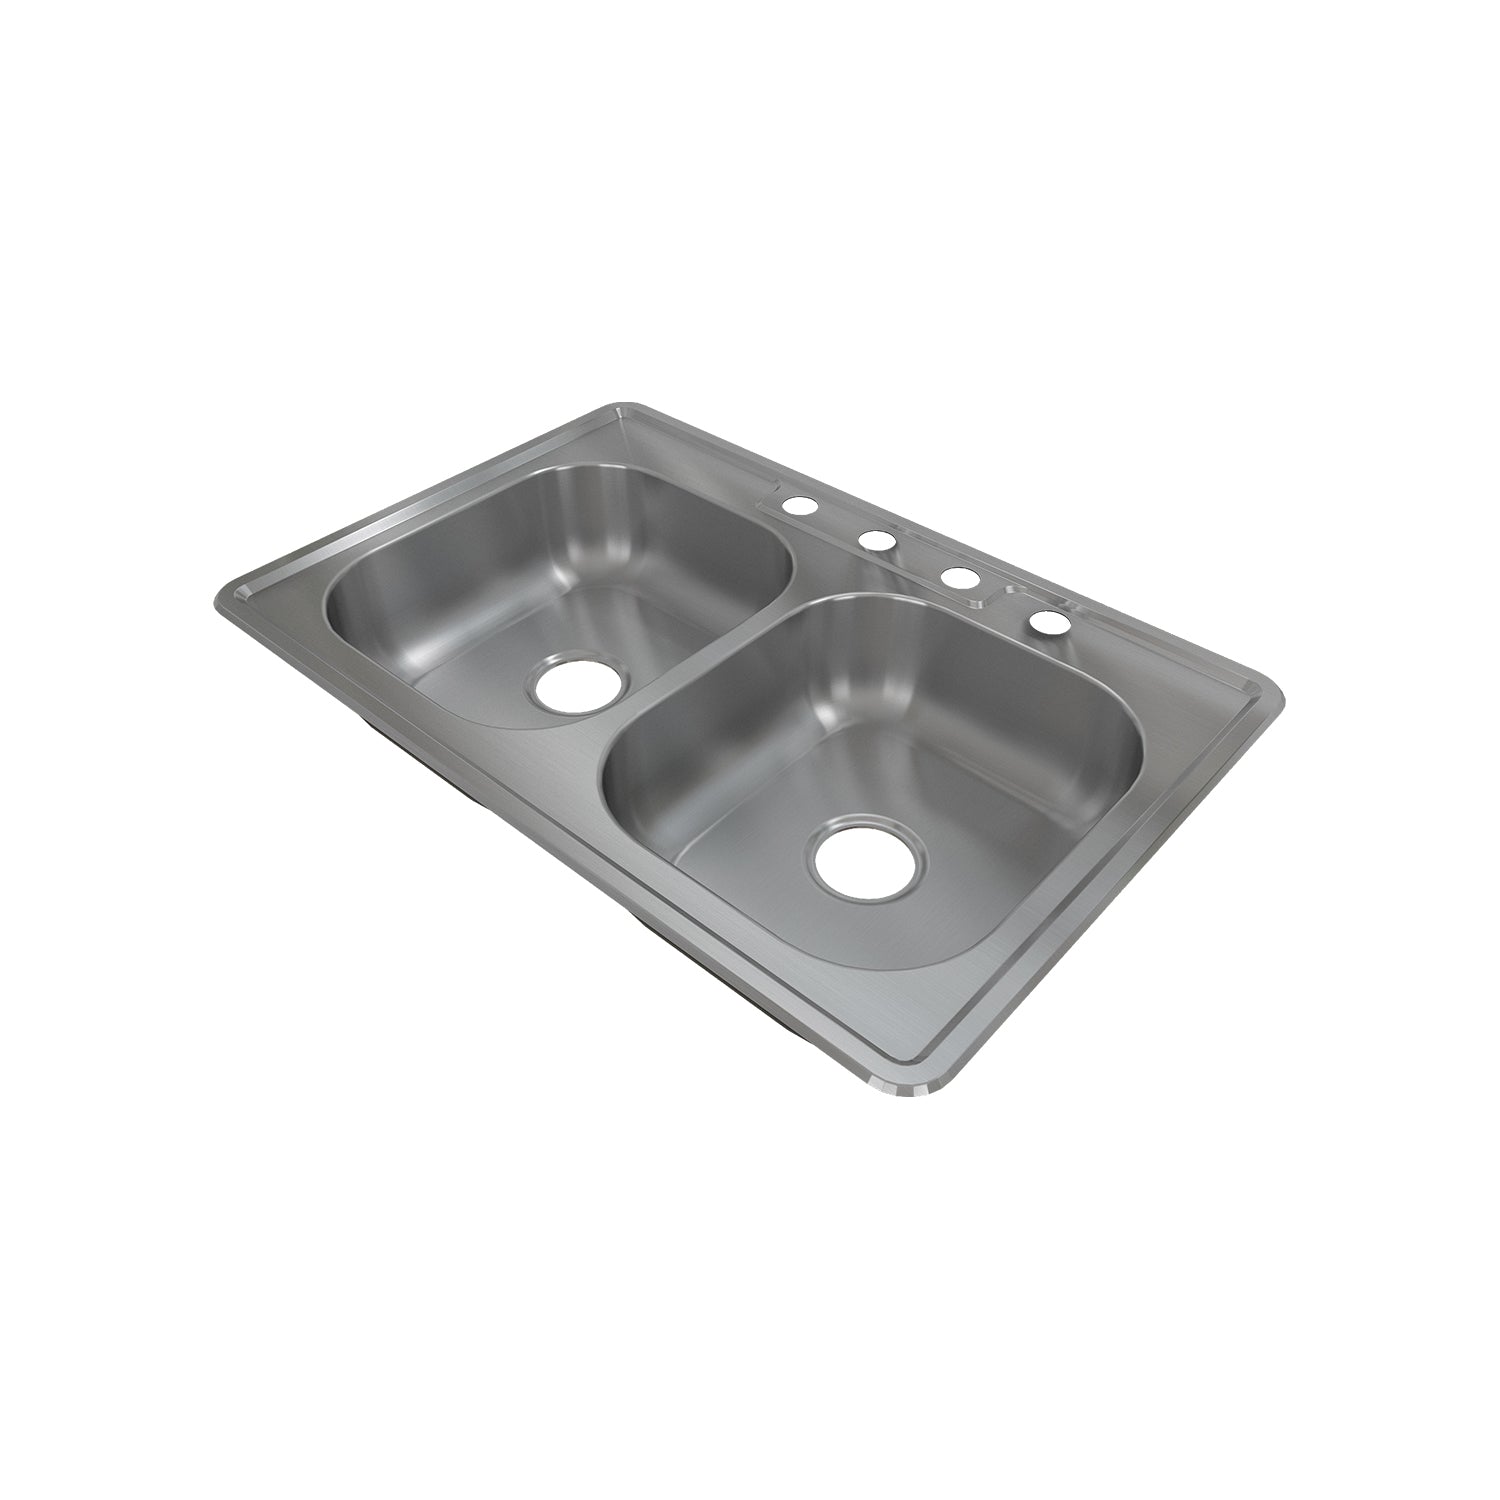 Sinber 33" x 22" x 5.5" Drop In Double Bowl Kitchen Sink with 18 Gauge 304 Stainless Steel Satin Finish MT3322D-ADA (Sink Only)